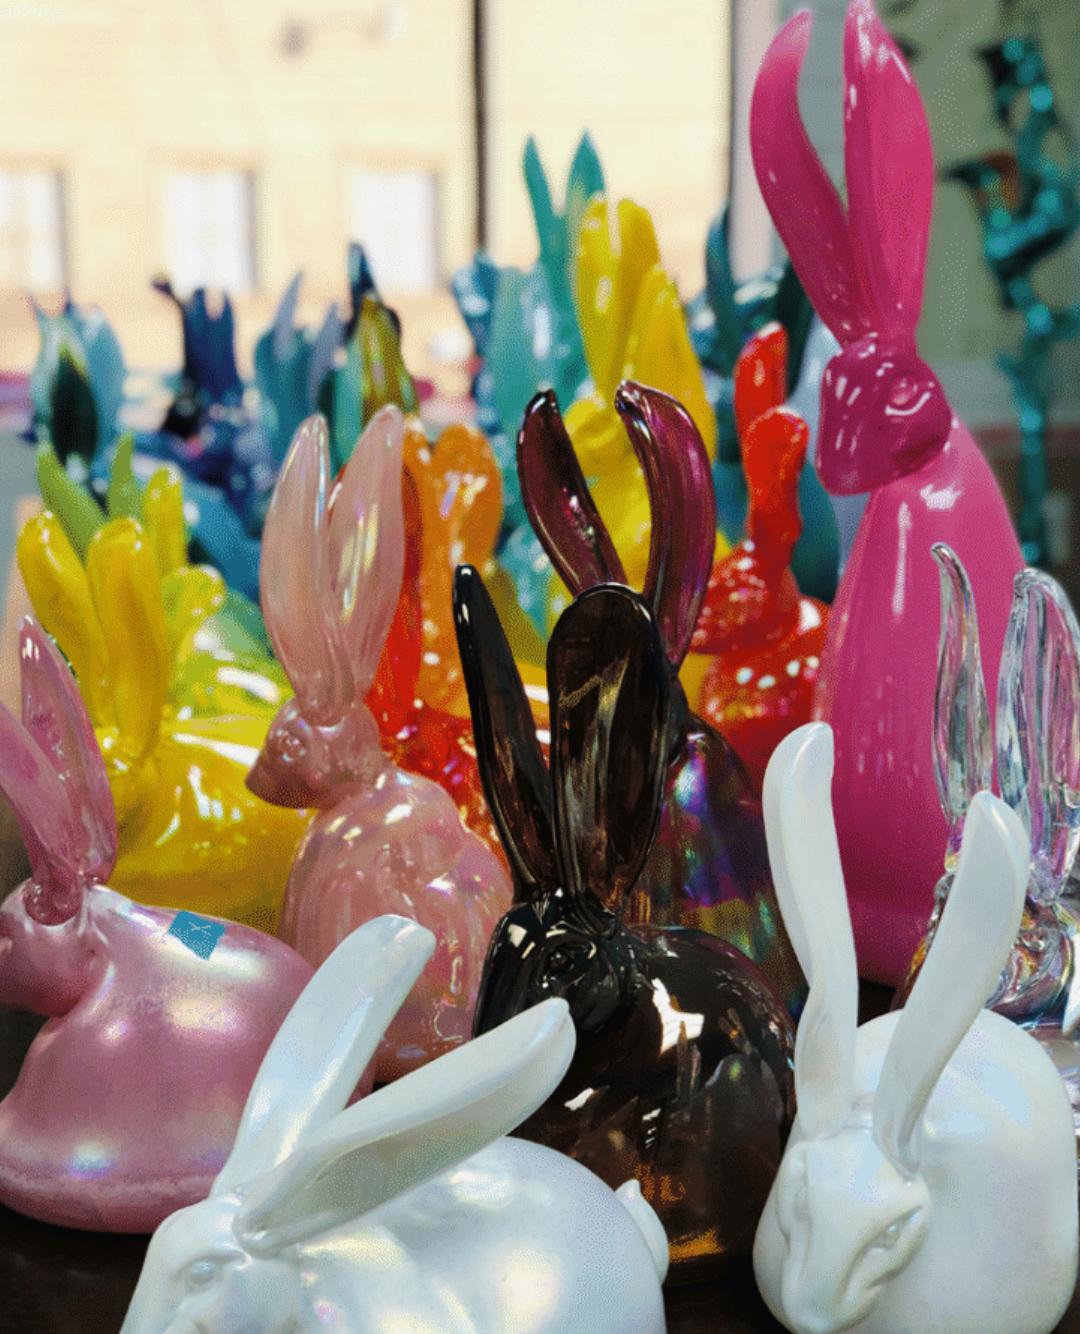 From canvas to kiln, Hunt Slonem brings his signature subject to life like never before. This wonderful hand-blown sculpture depicts one of Slonem's signature bunnies in beautiful pink opaque glass. Slonem’s new blown-glass sculptures are a sublime